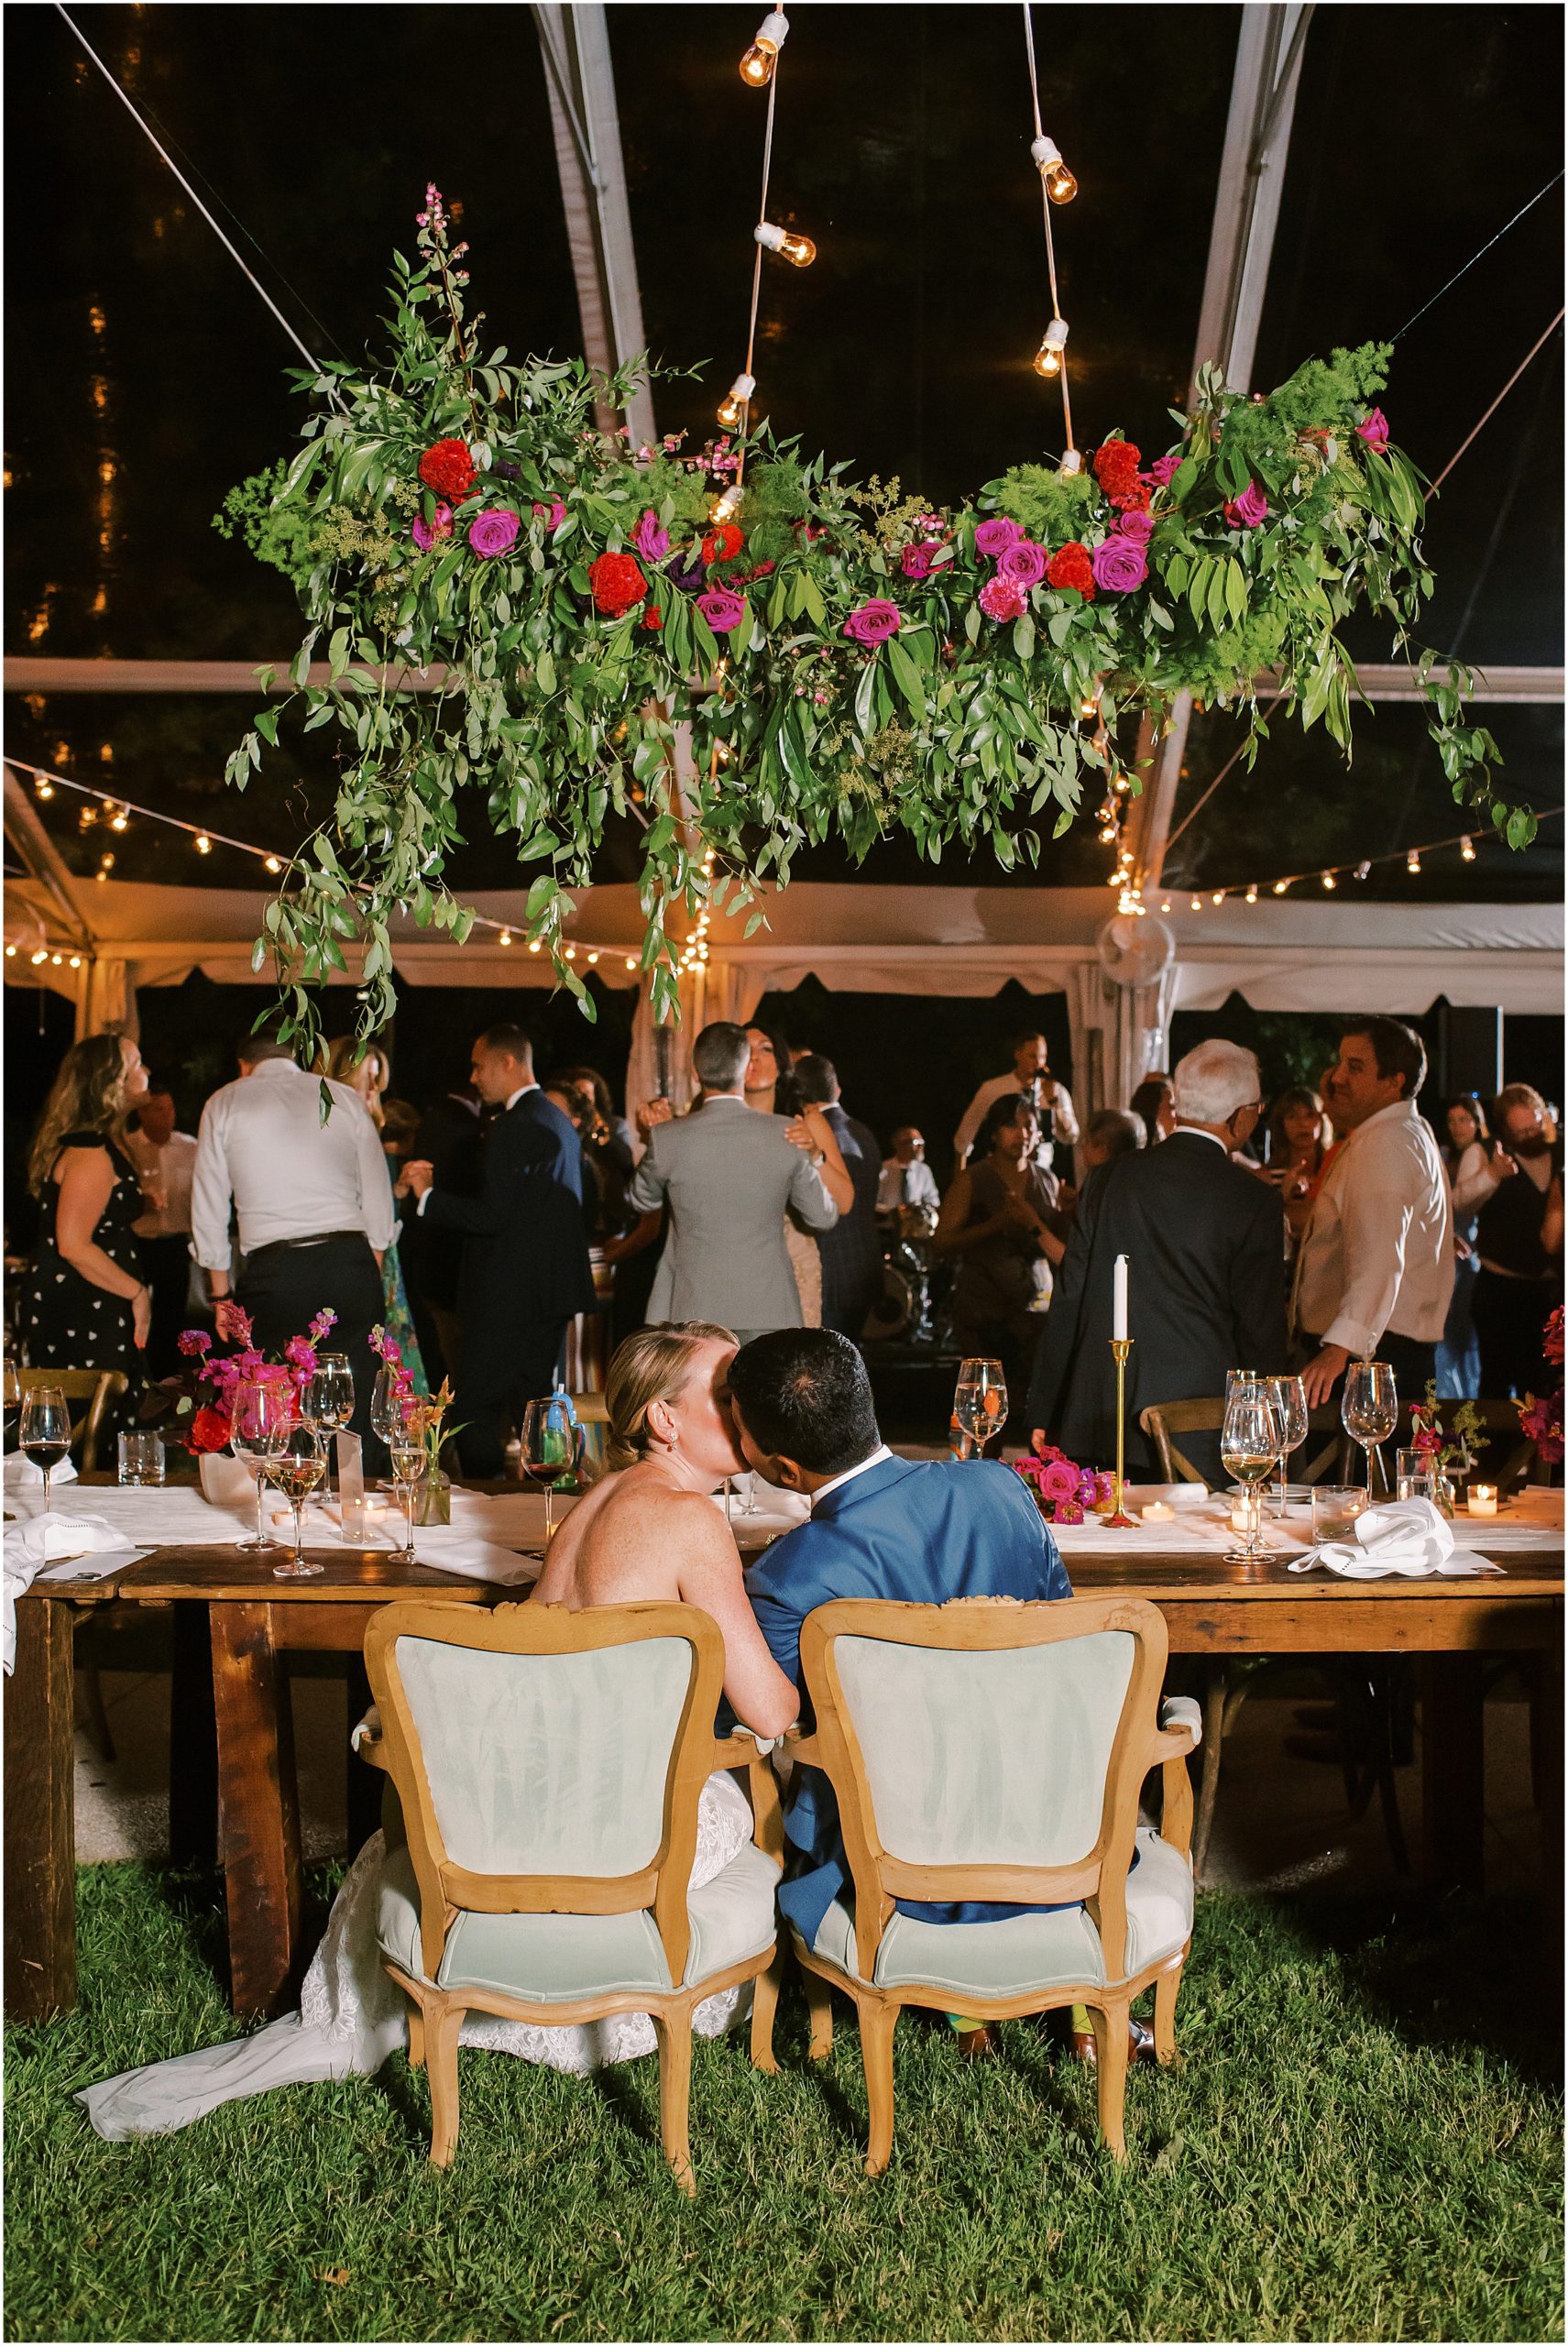 Bride and groom kissing under hanging greenery in clear wedding tent